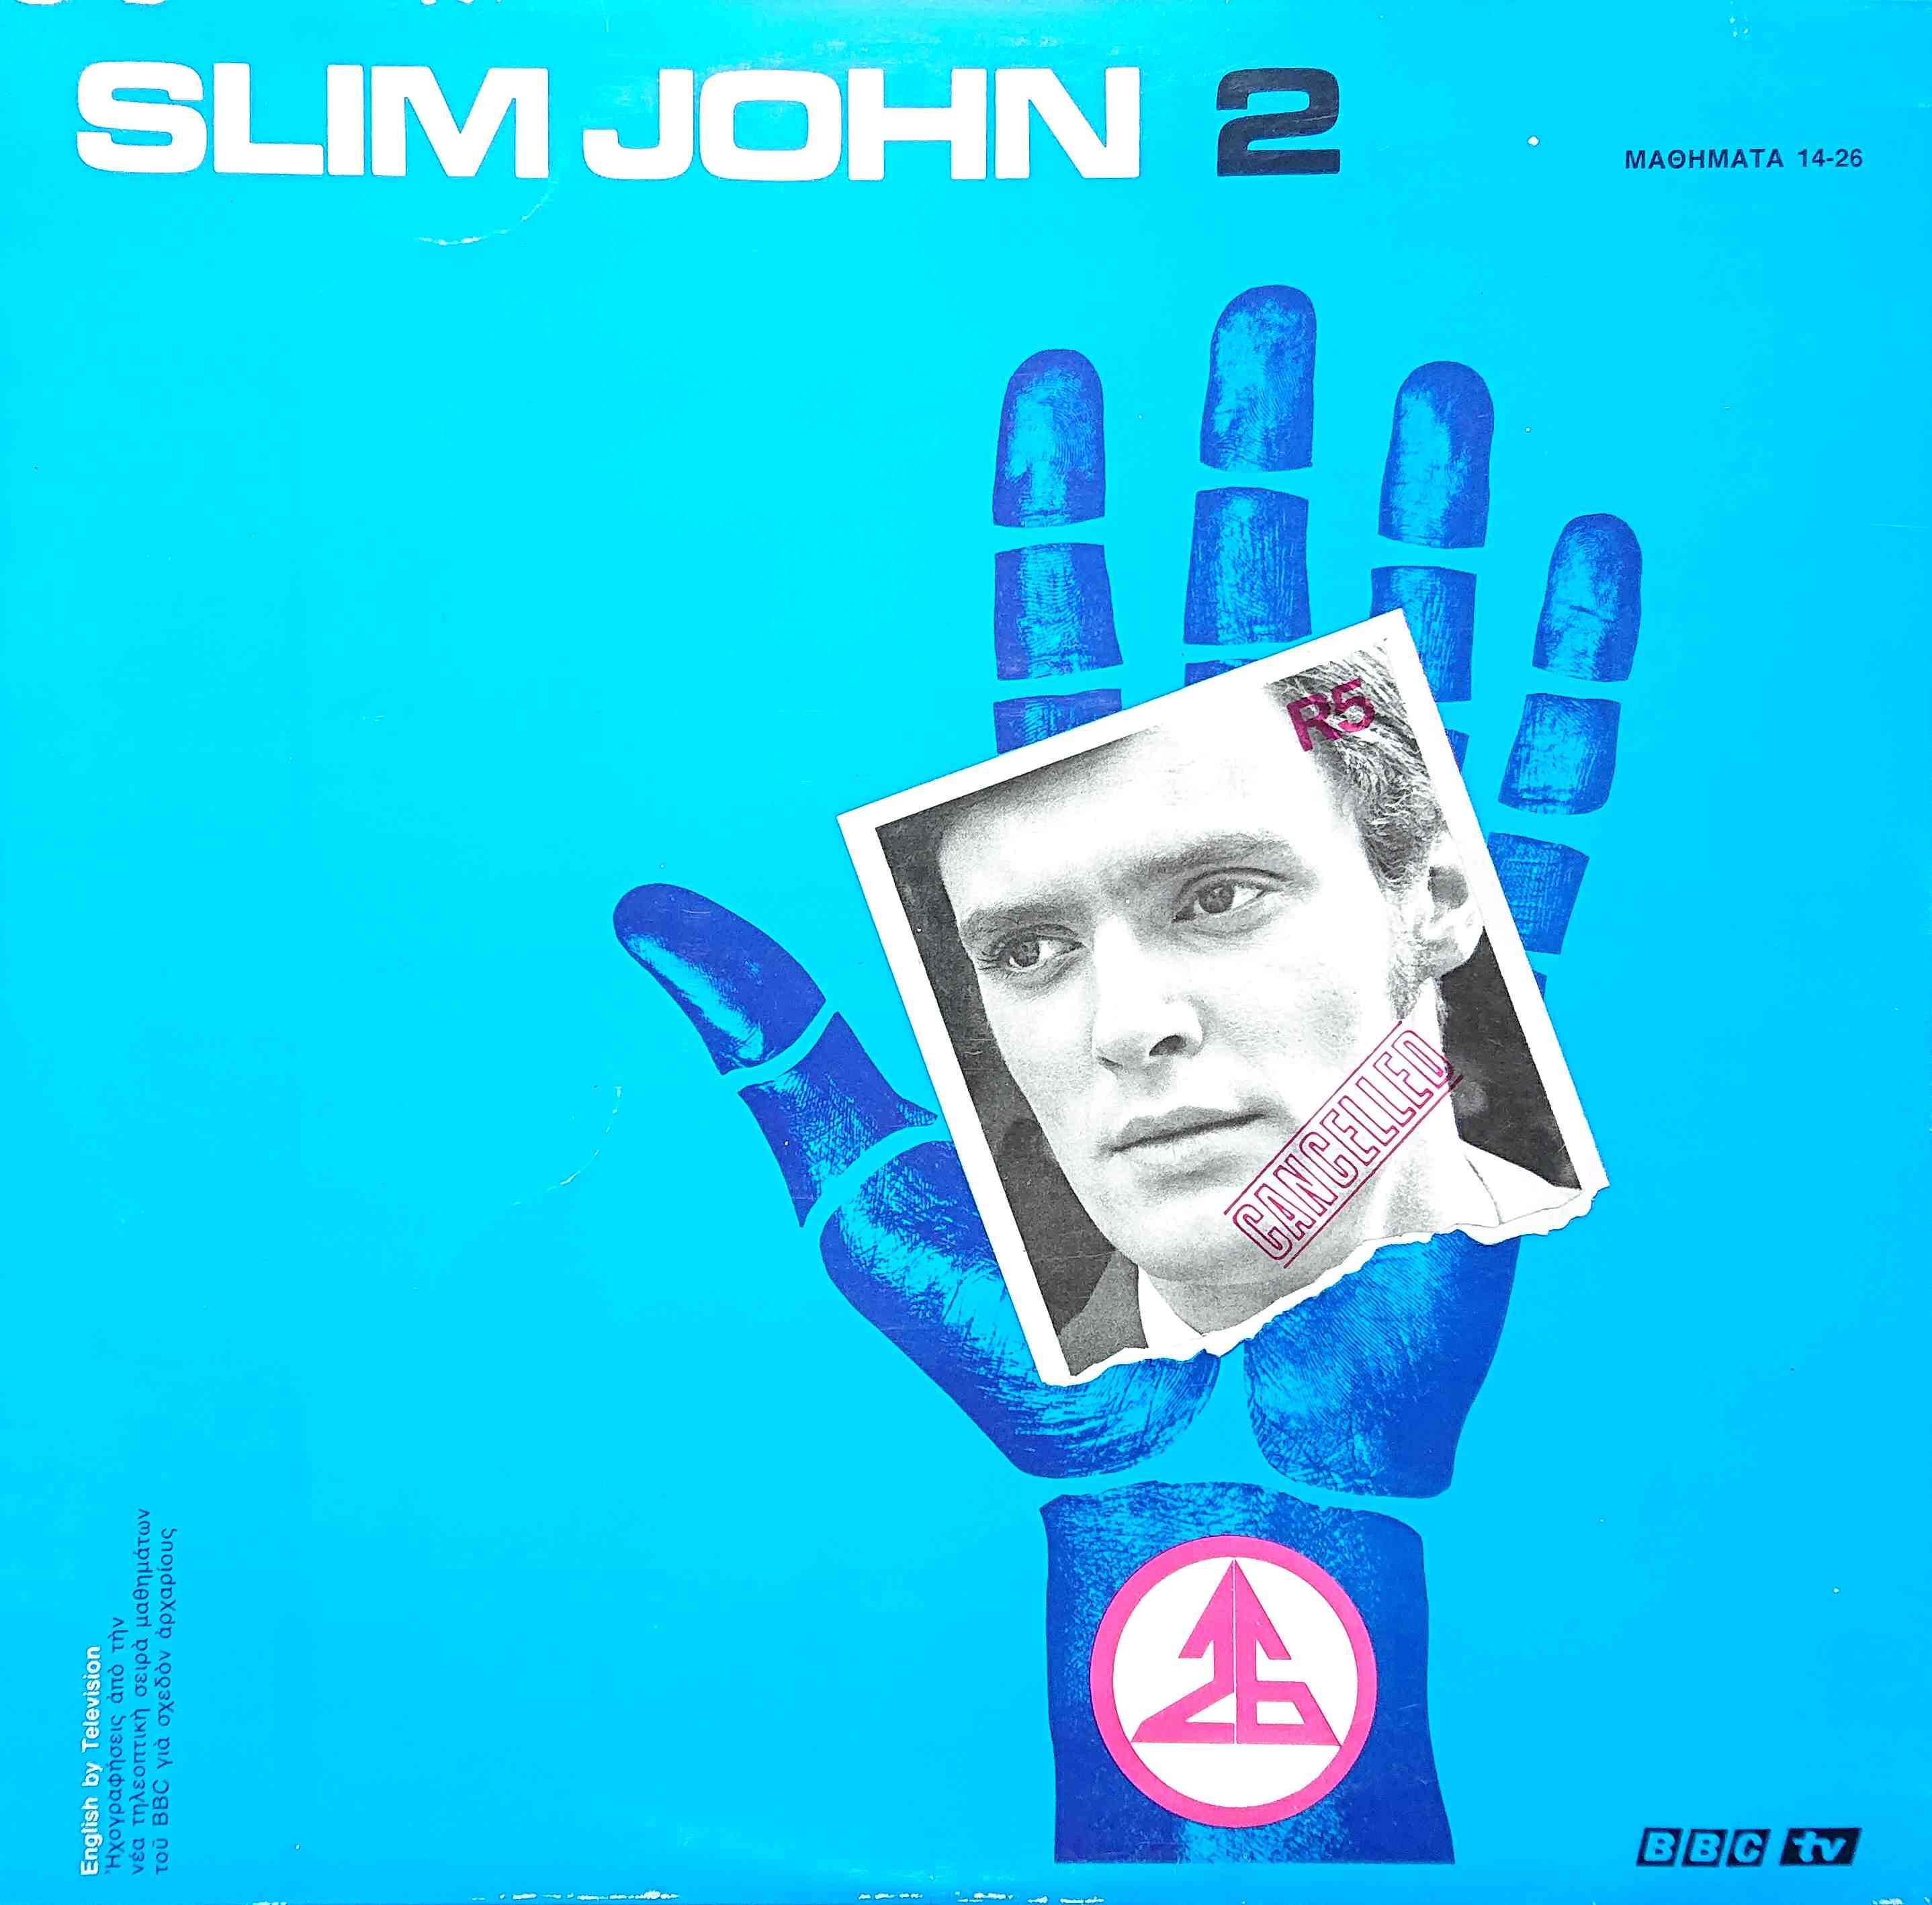 Picture of Slim John 2 by artist Unknown from the BBC albums - Records and Tapes library